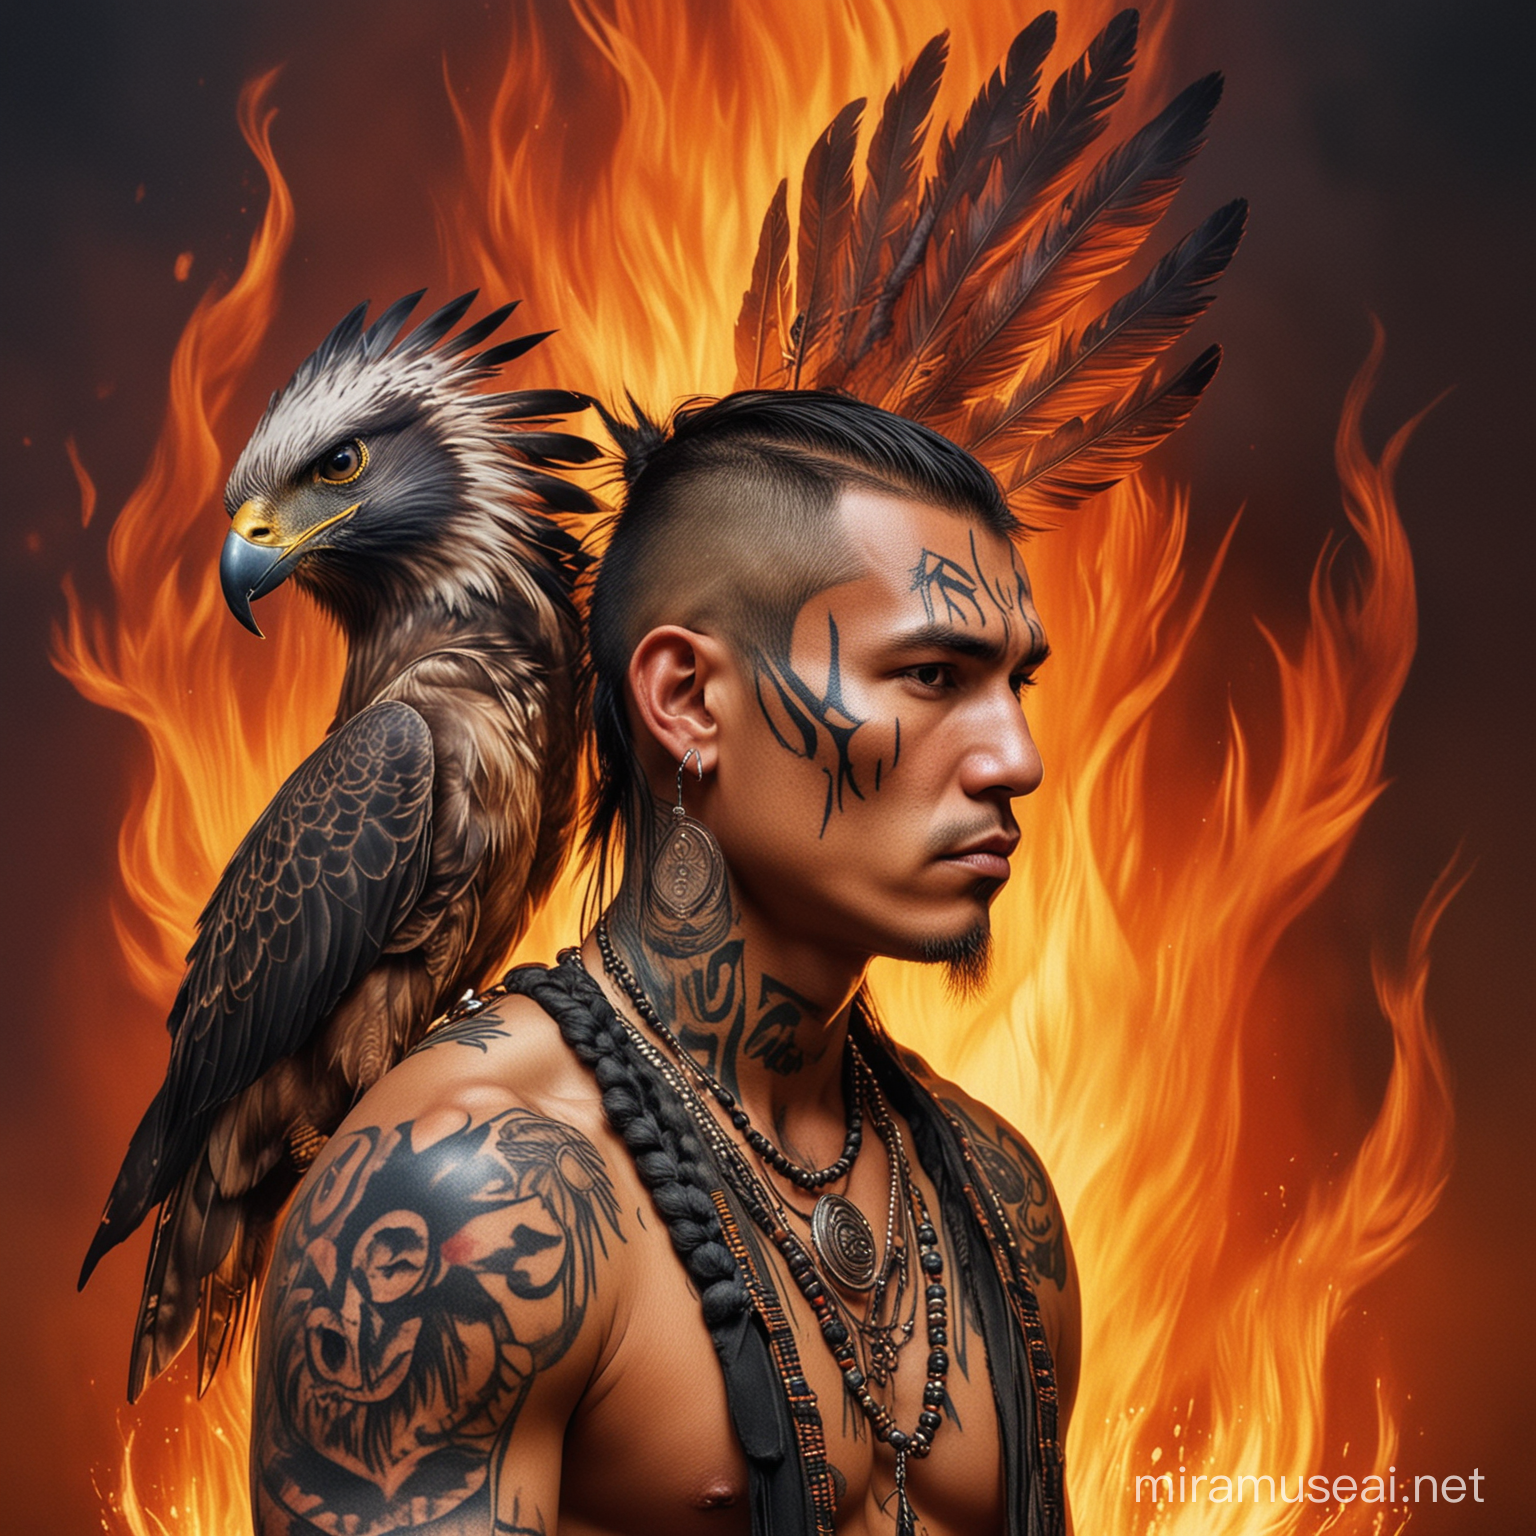 American Indian with Mohawk Haircut and Falcon Face Tattoo amidst Flames